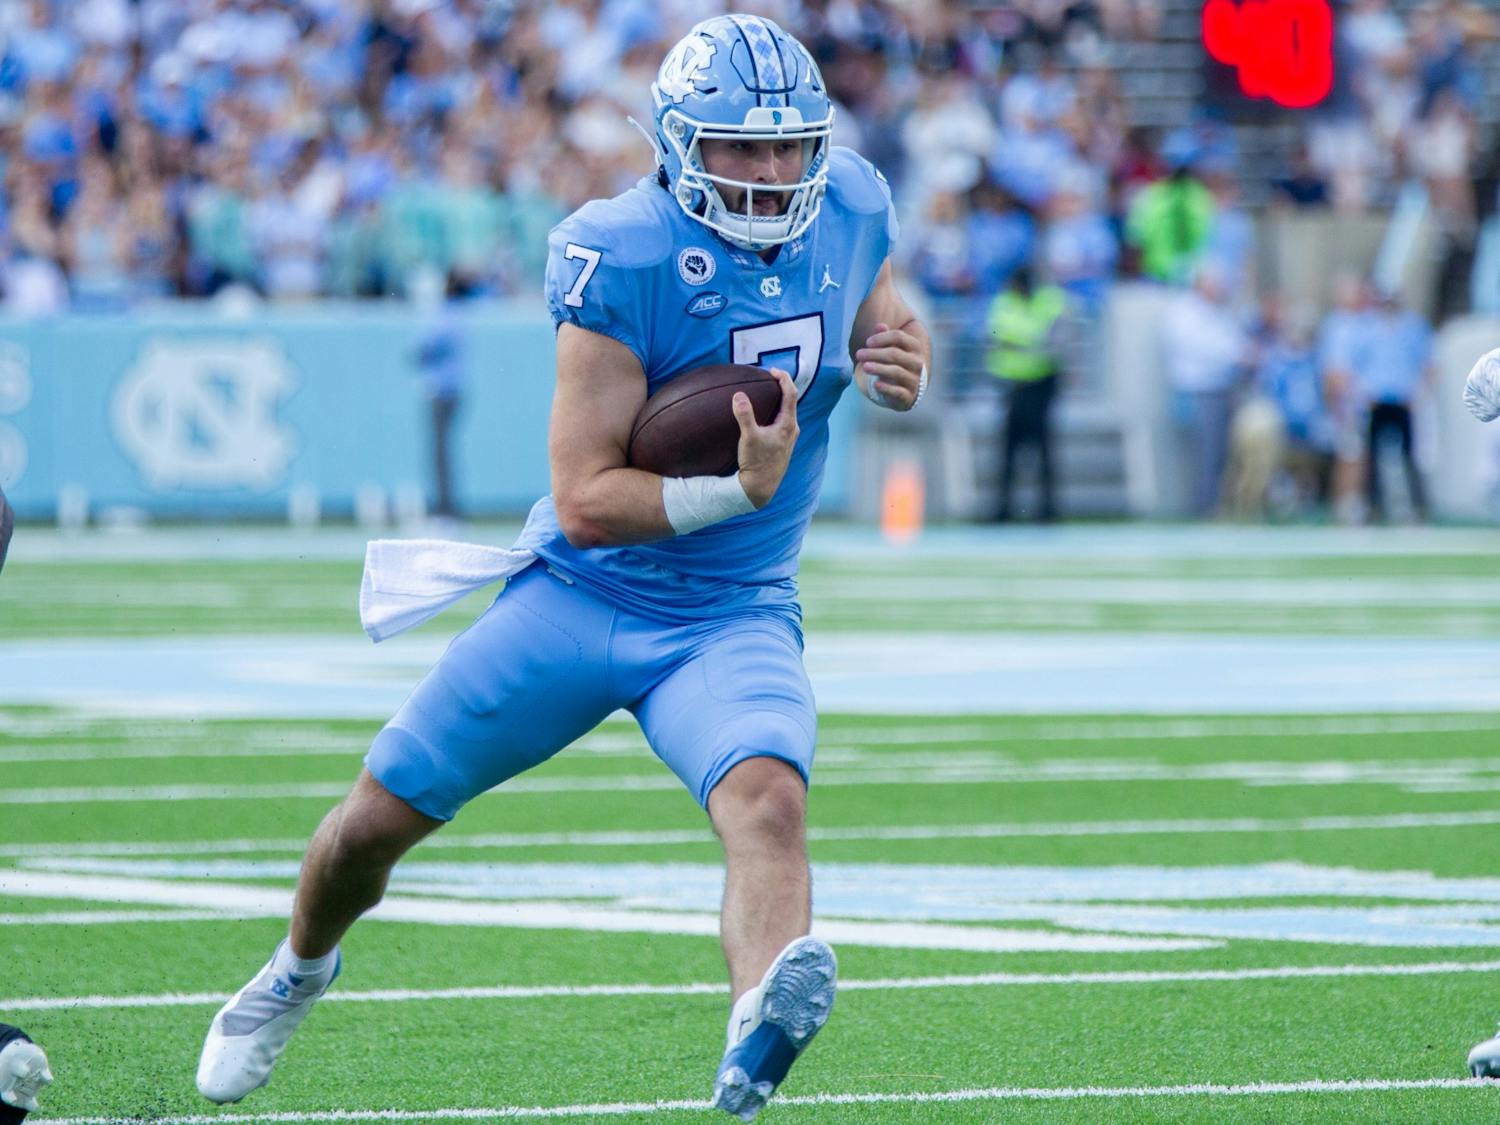 Junior quarterback Sam Howell (7) carries the ball at the game against Miami on Oct. 16 at Kenan Stadium. UNC won 45-42.